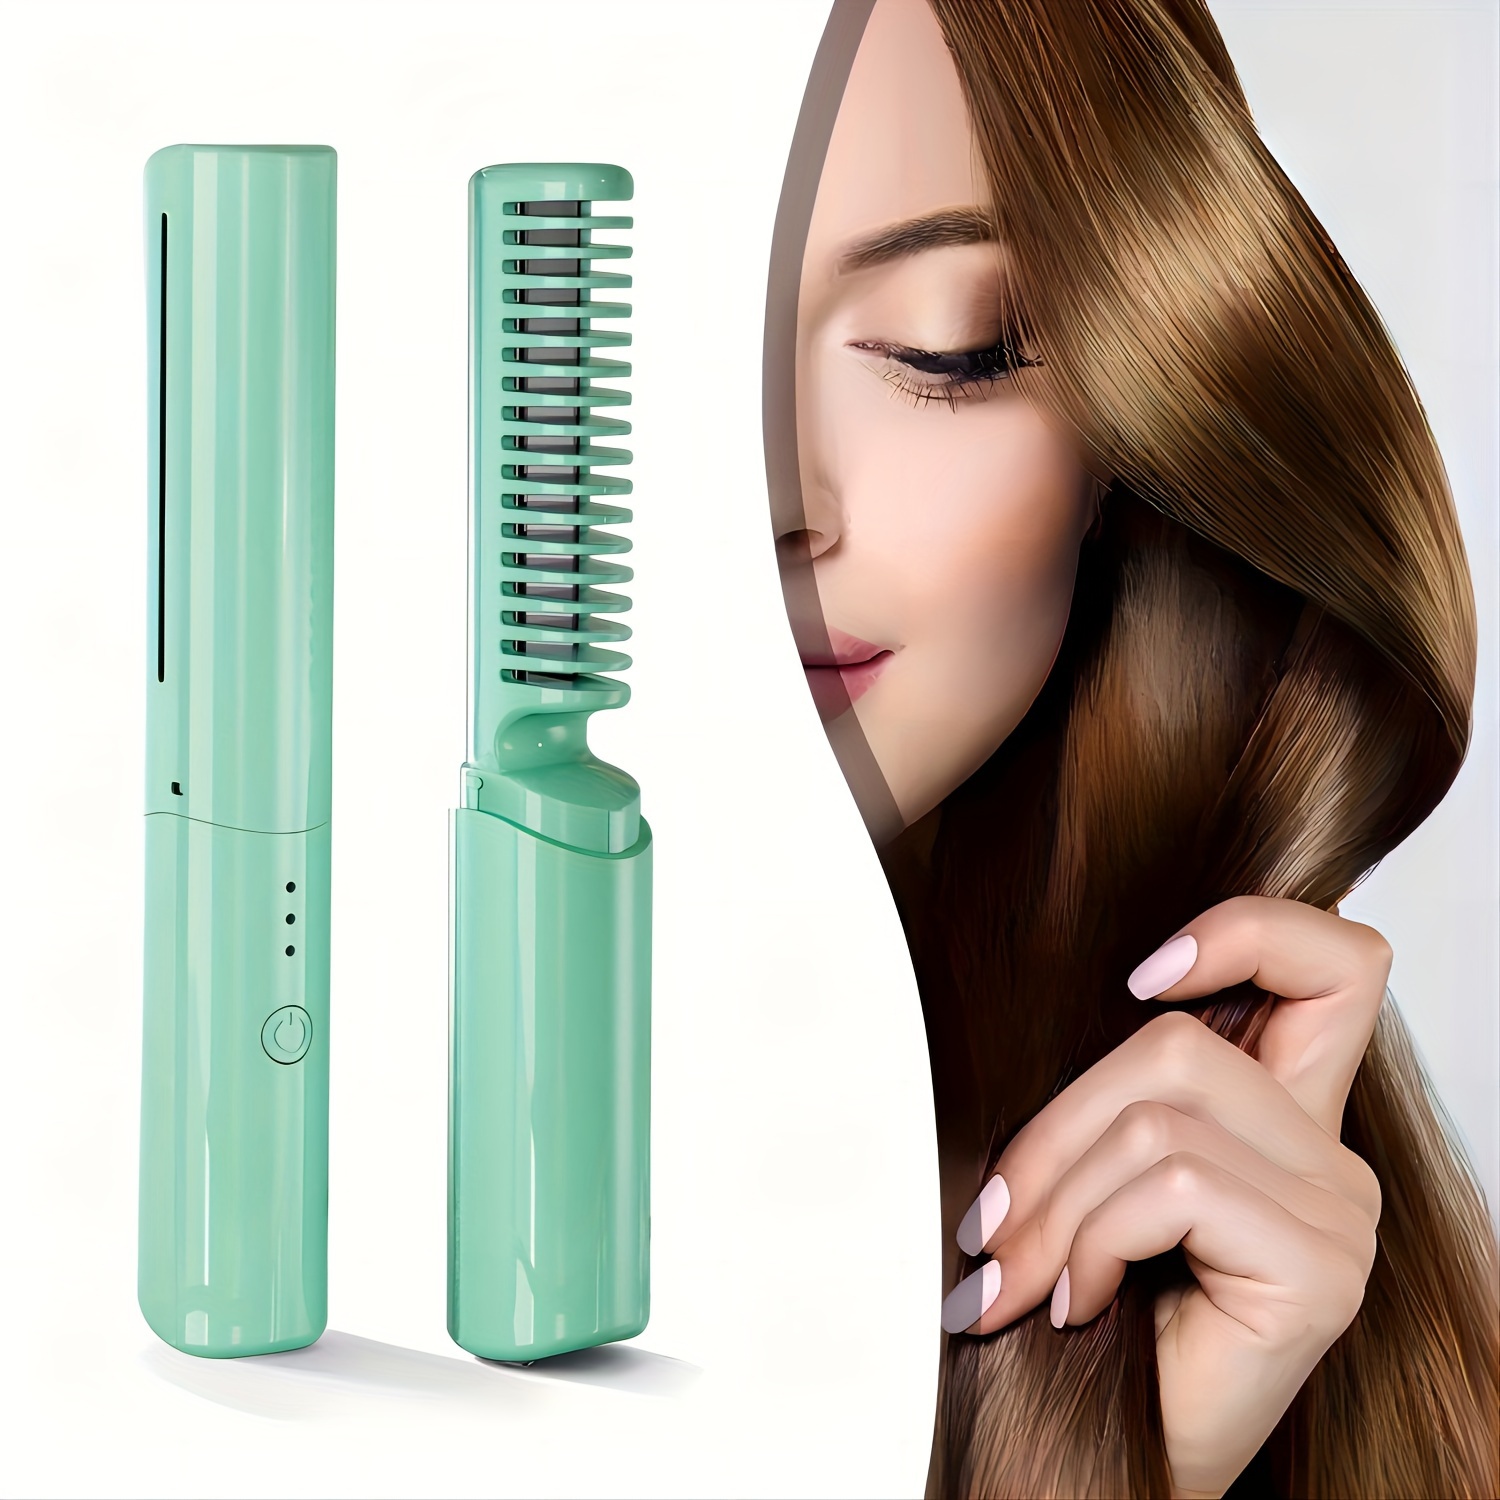 

Cordless Mini Hair Straightener Comb, Rechargeable Usb Hair Straightening And Curling Iron, Portable 2-in-1 Hair Styling Brush For Home And Dorm Use, Gifts For Women